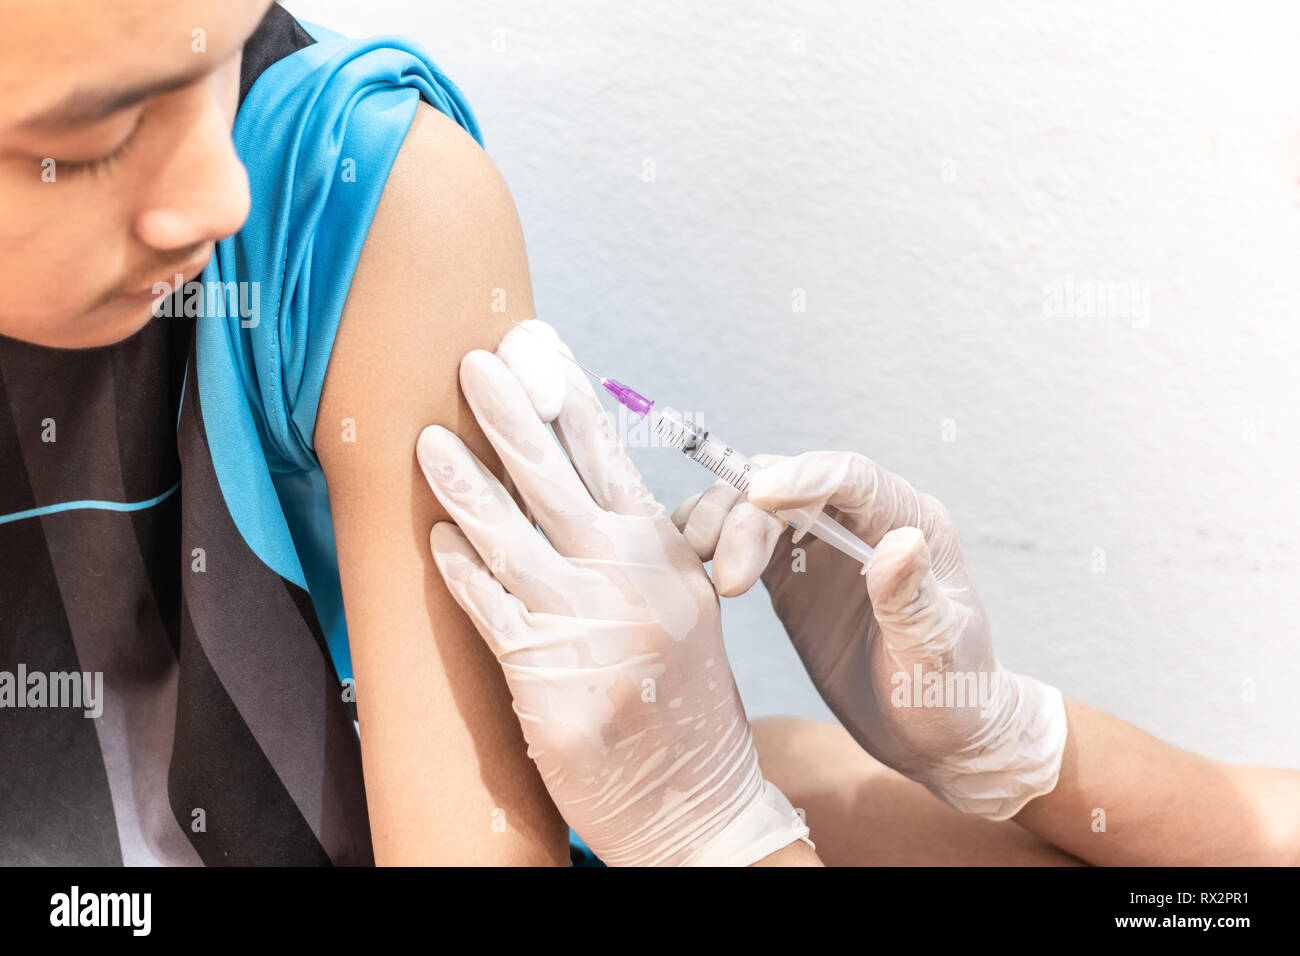 https://c8.alamy.com/comp/RX2PR1/doctor-holding-syringe-and-cotton-ball-to-prepare-injections-for-patients-RX2PR1.jpg